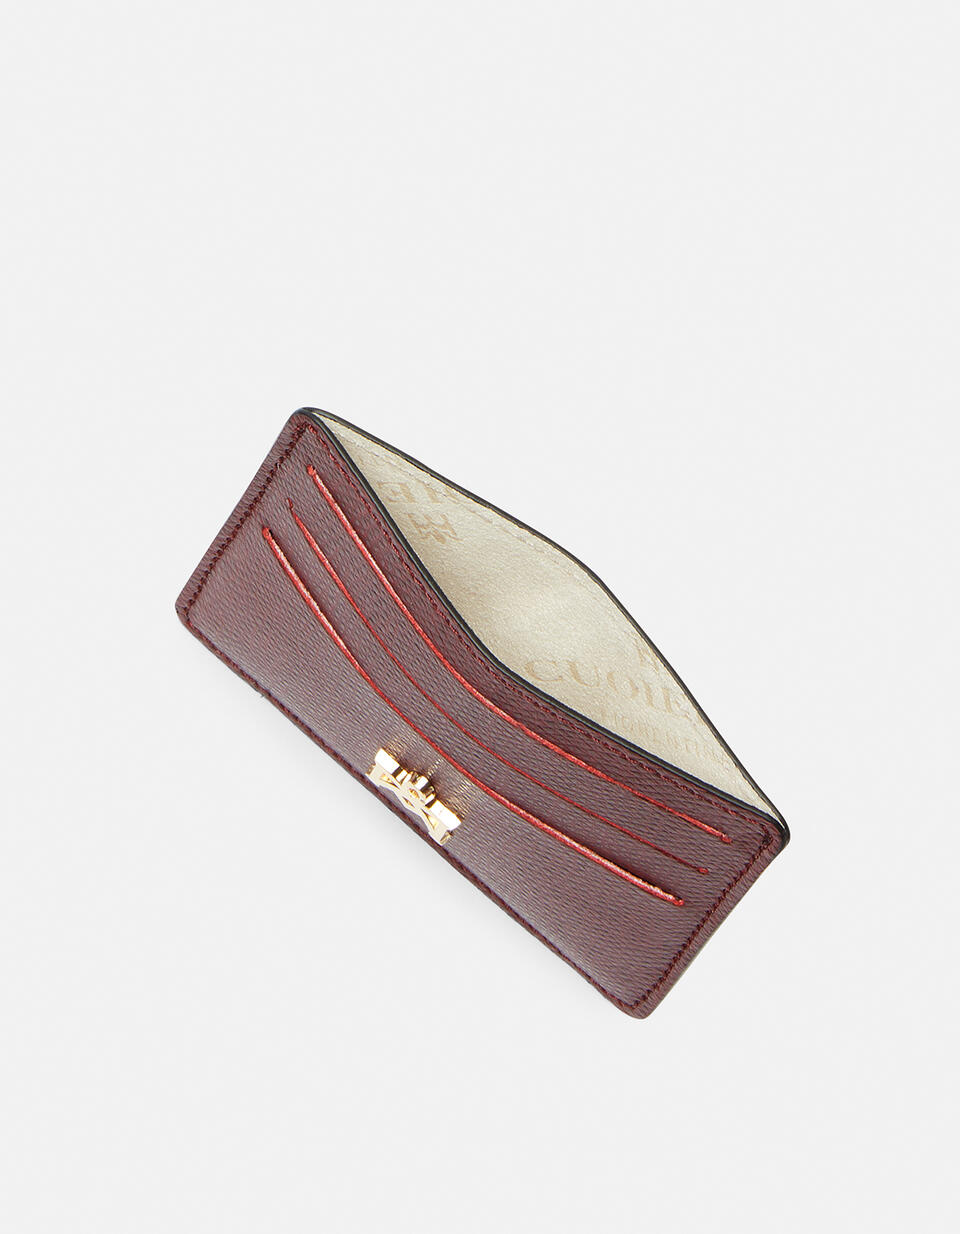 Bella credit car holder with space for banknotes - Card Holders - Women's Wallets | Wallets BORDEAUX - Card Holders - Women's Wallets | WalletsCuoieria Fiorentina